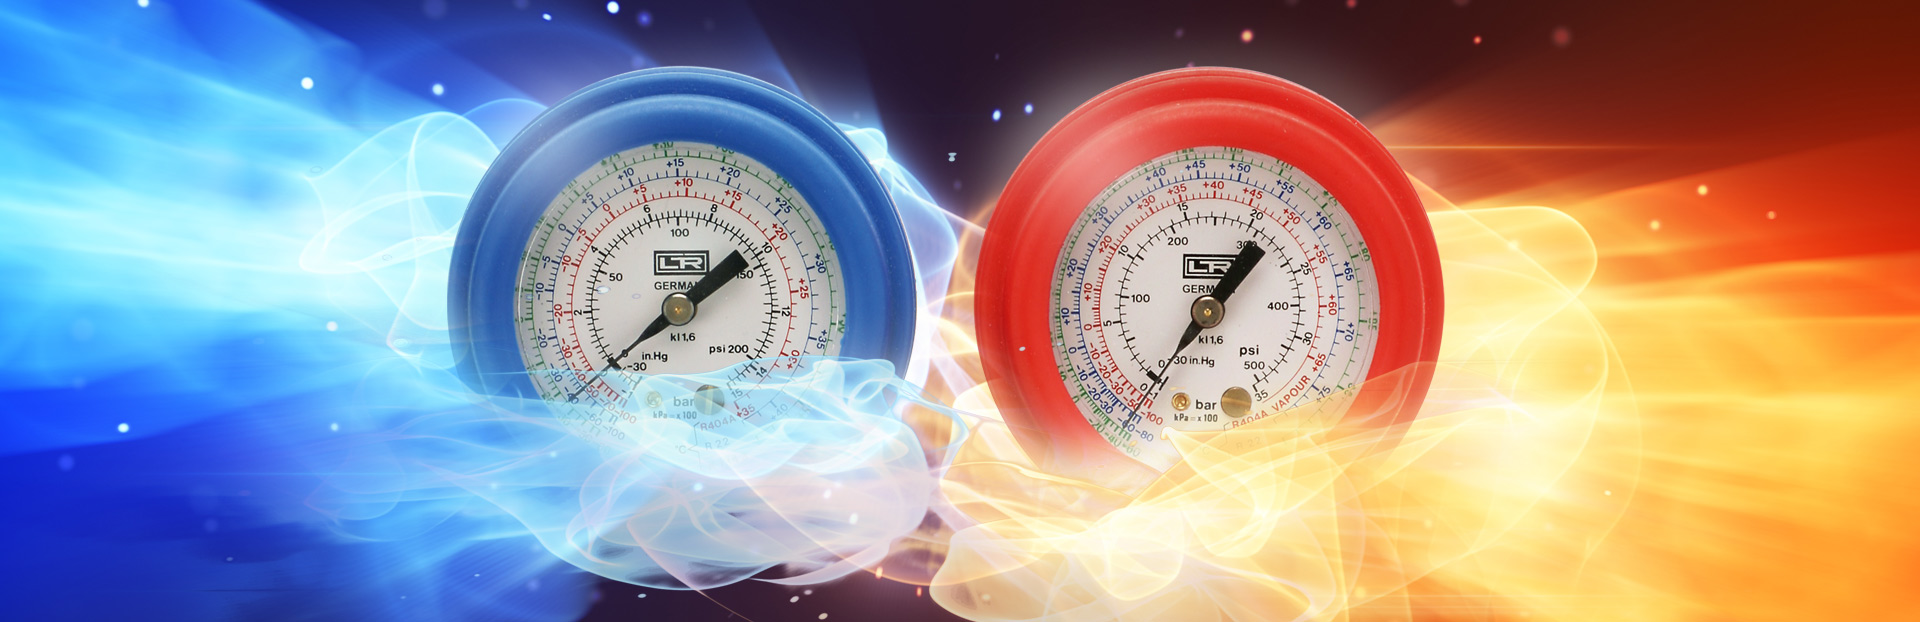 Pressure gauge for cold and hot